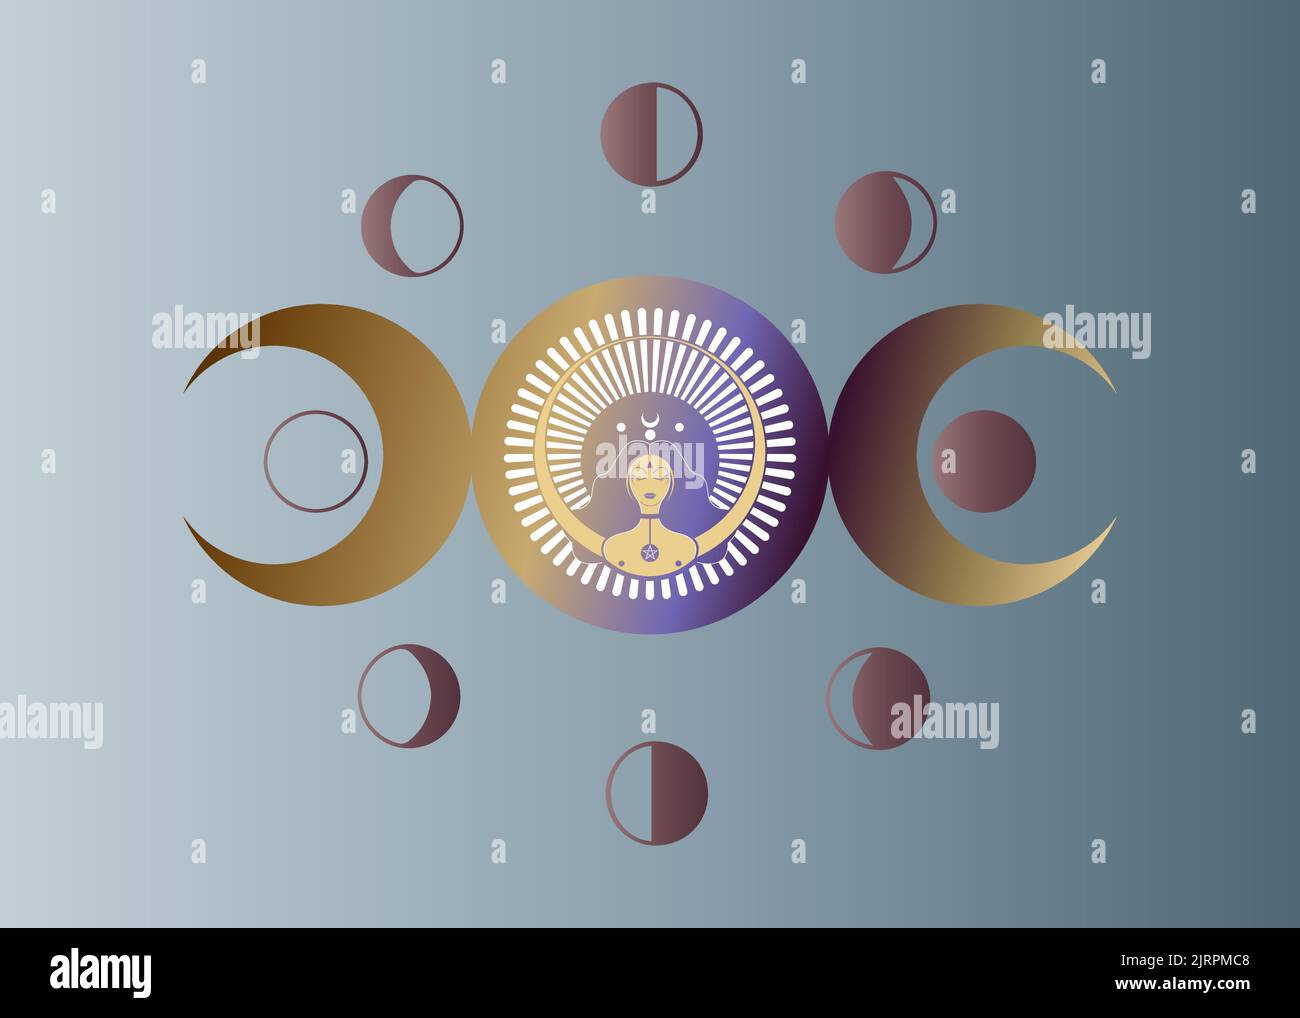 Wiccan woman icon, Triple goddess symbol of moon phases. Triple Moon Religious Wicca sign. Neopaganism logo. Lunar calendar cycles. New, Full Moon Stock Vector